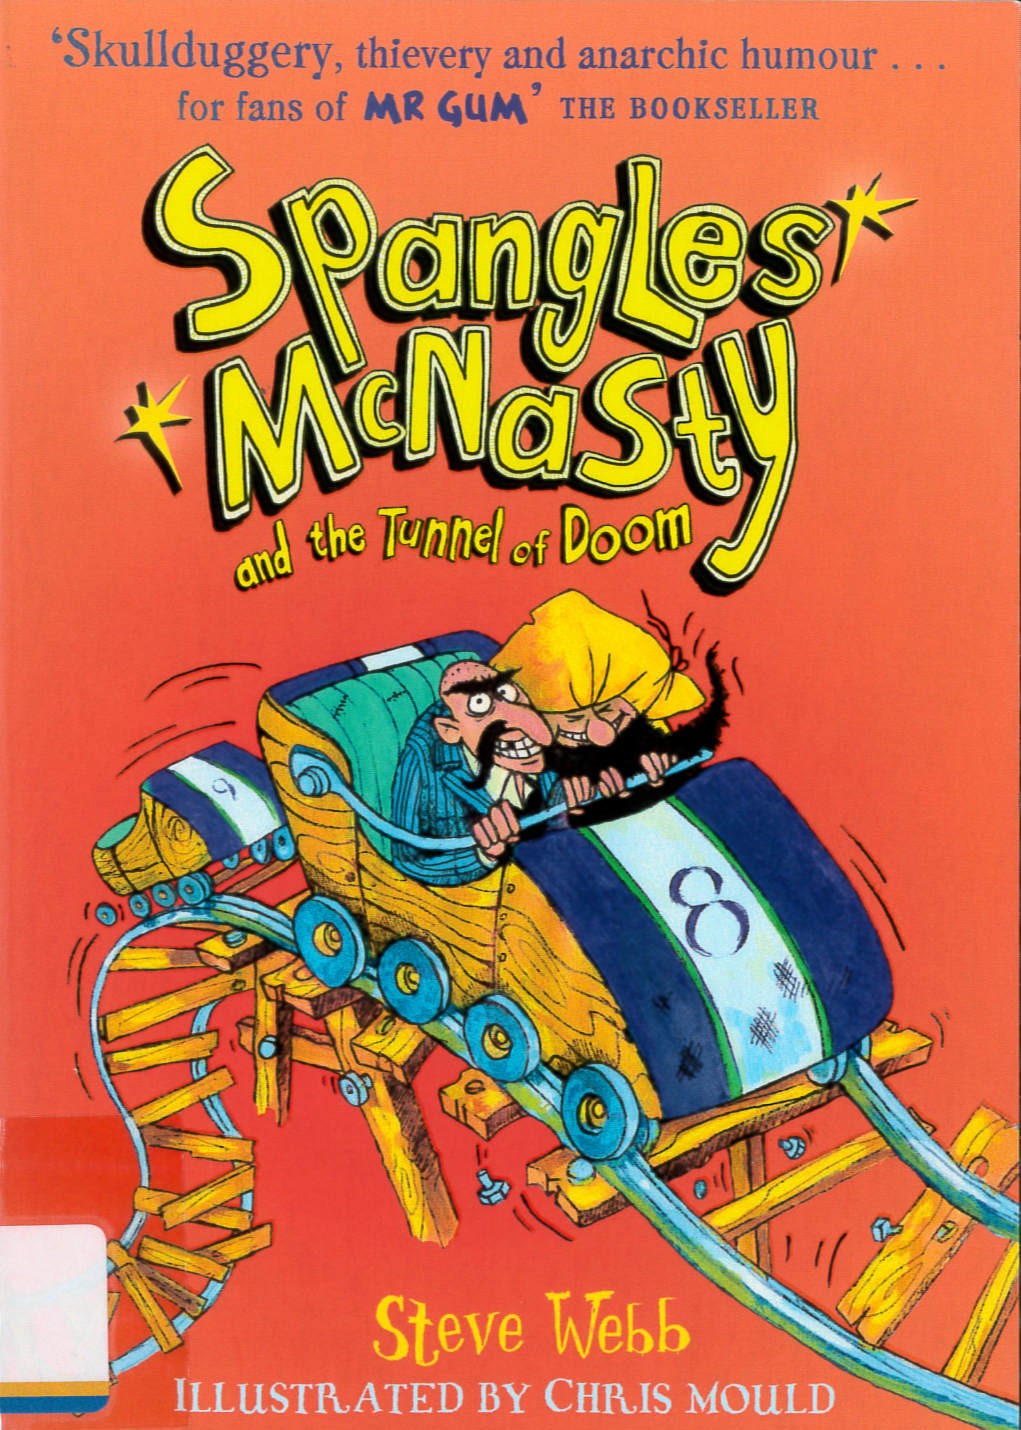 Spangles McNasty and the tunnel of doom /